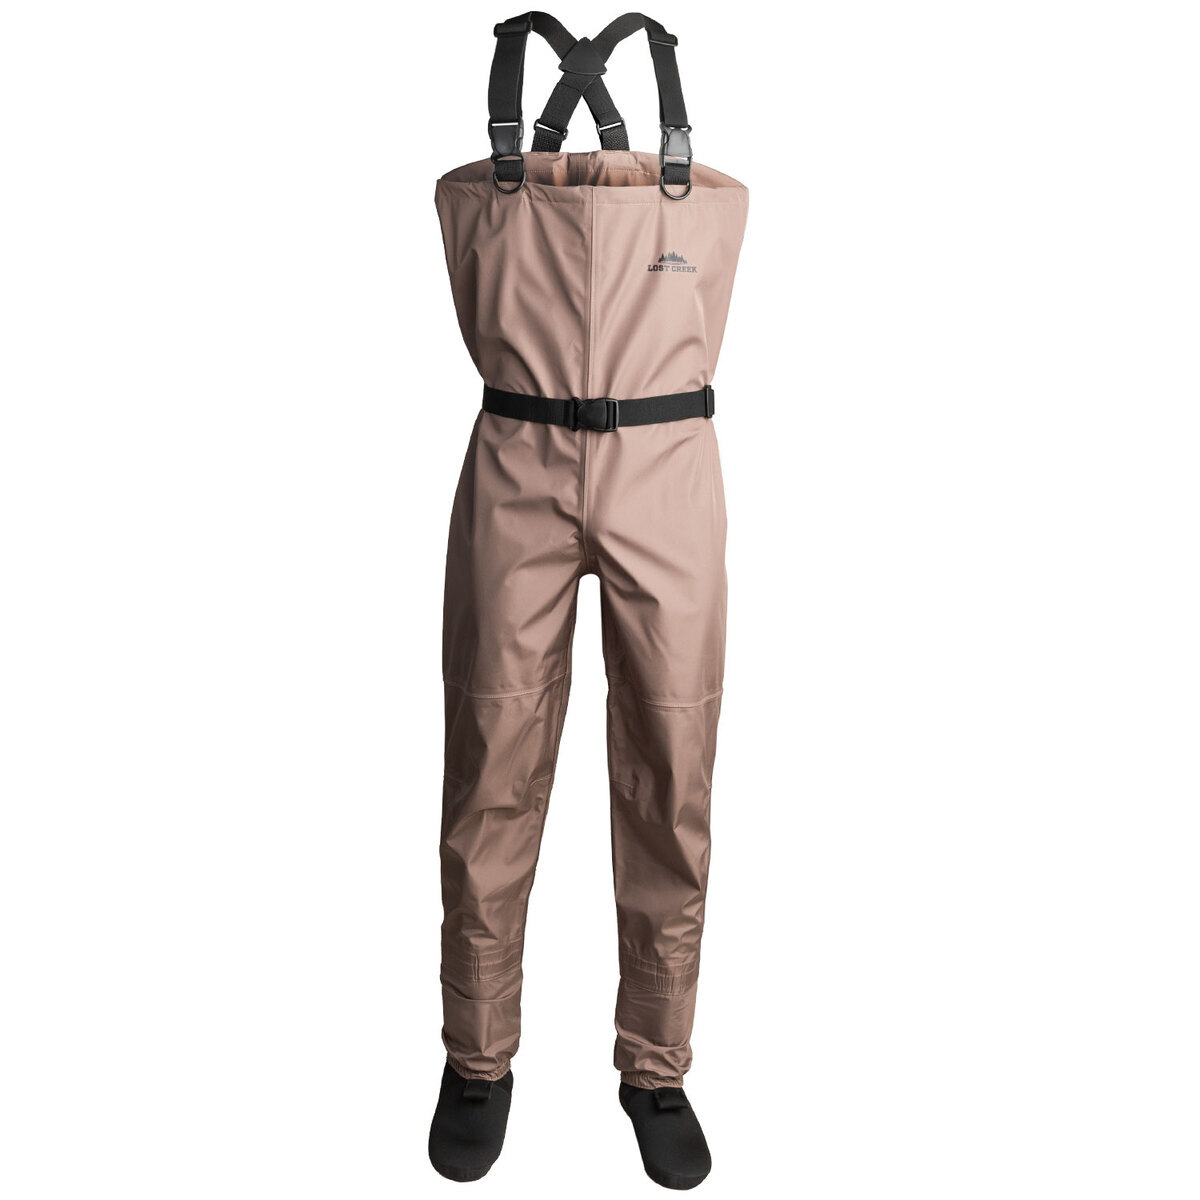 Fishing Waders for Men for sale in Austin, Texas